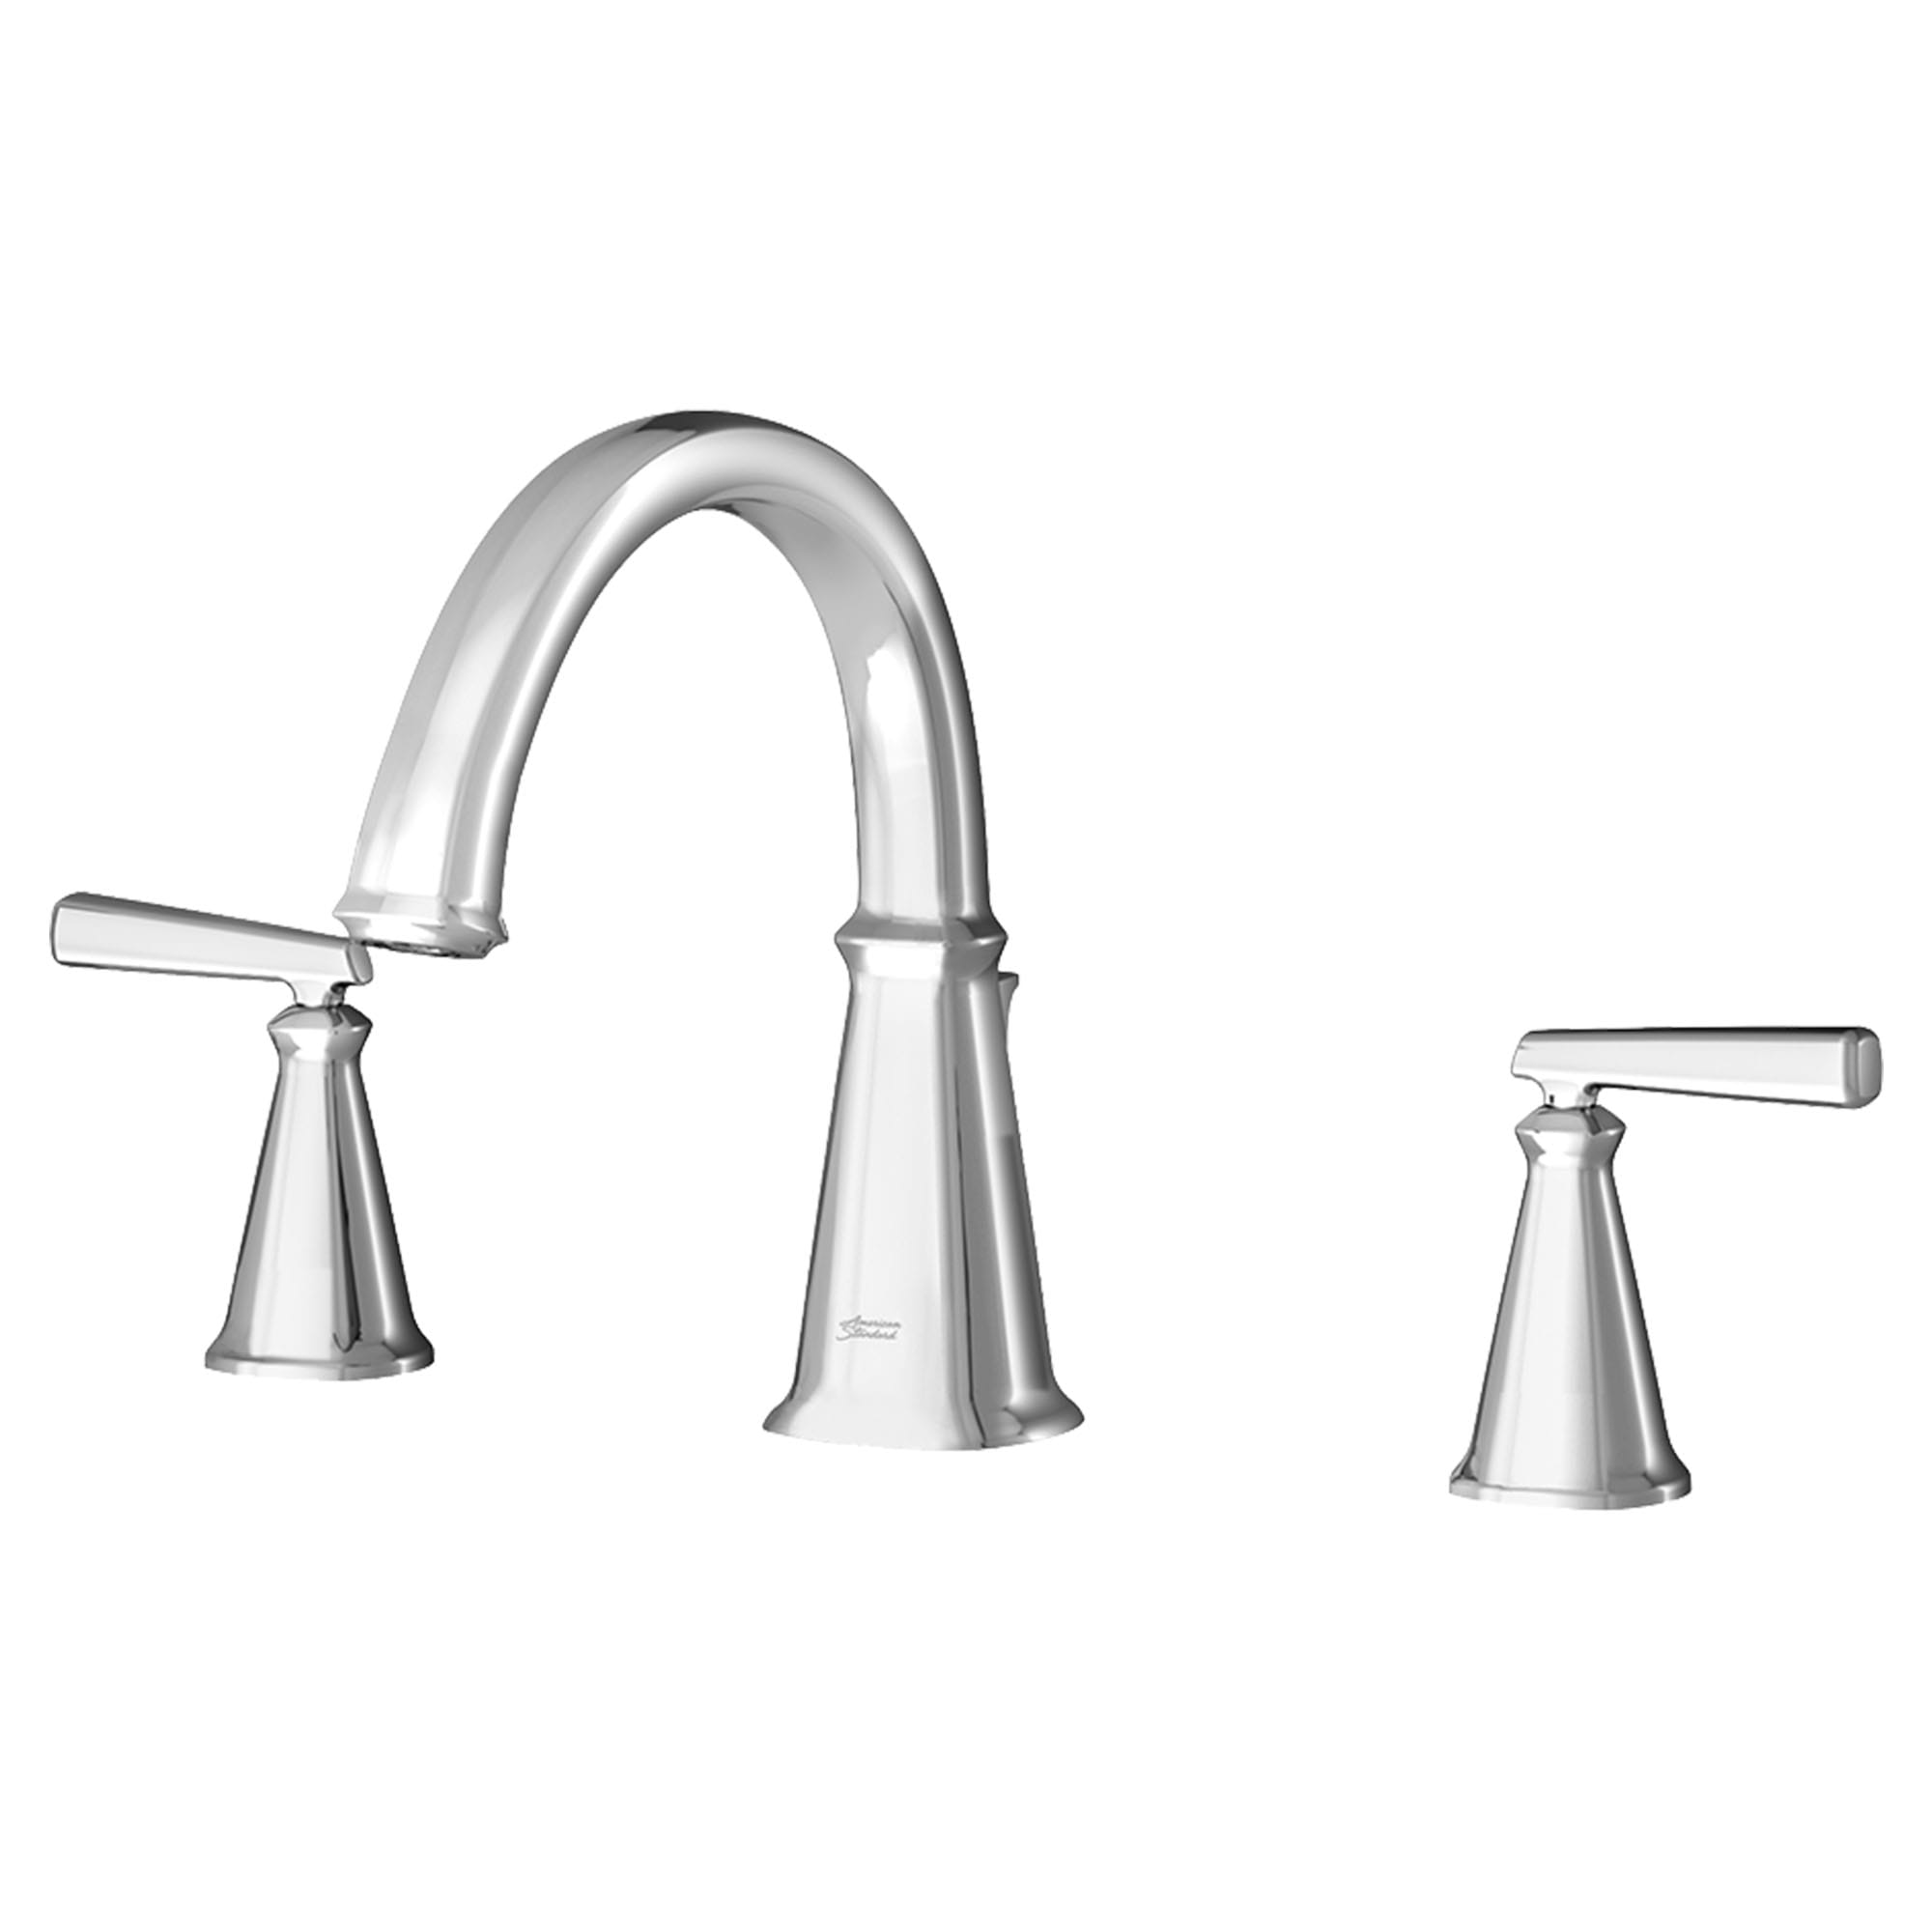 Edgemere Bathtub Faucet With Lever Handles for Flash Rough In Valve CHROME